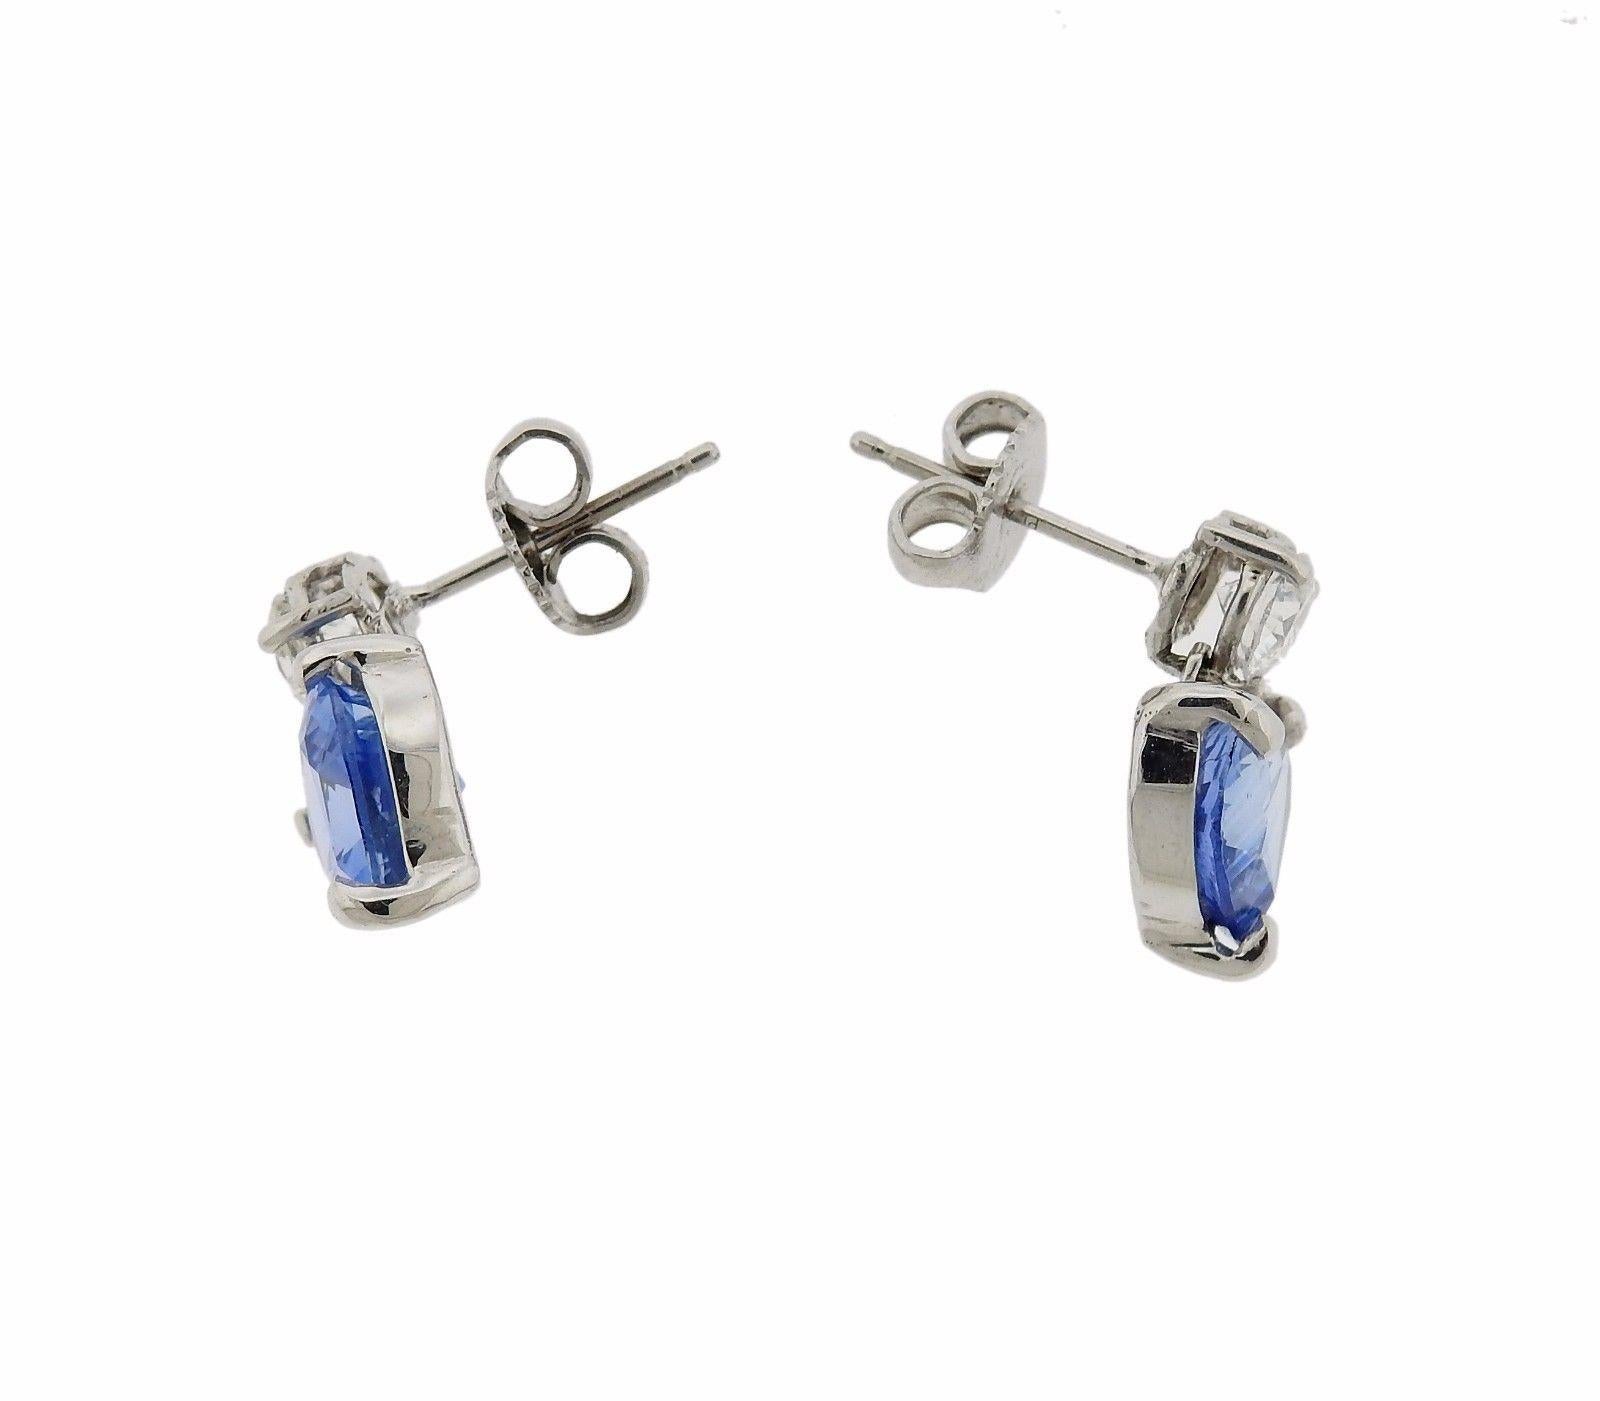 Beautiful and delicate platinum earrings, set with AGL certified heart shaped cornflower sapphires - total approx. 4.90ctw, and 0.60ctw in VS/GH diamonds. Earrings are 15mm x 10mm, weigh 3.7 grams. 
Come with AGL certificate for the sapphires.